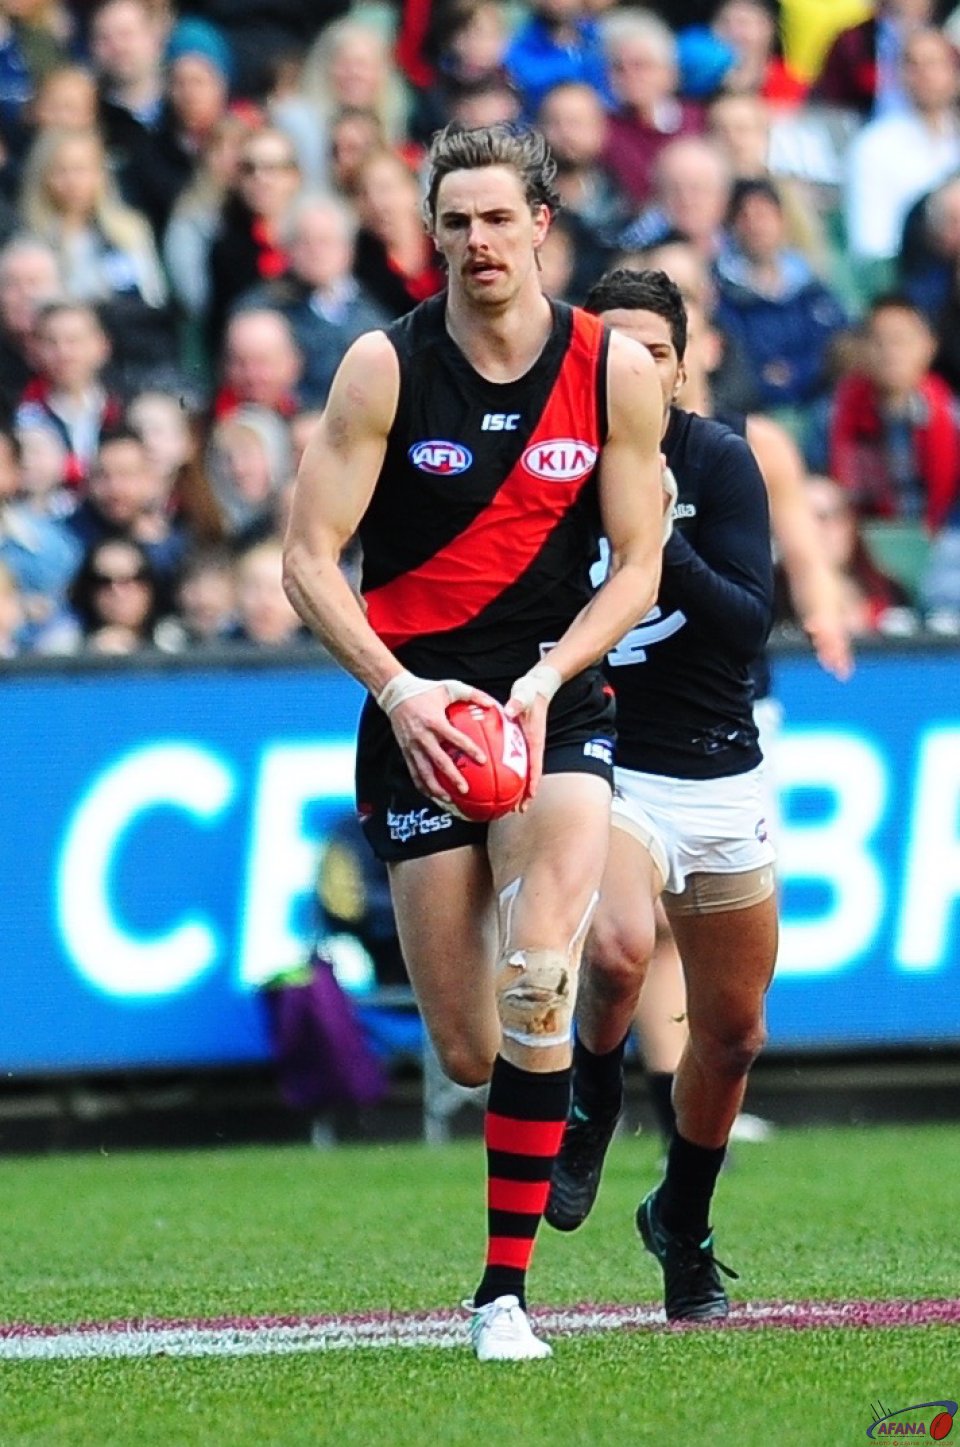 Daniher lines up for a kick